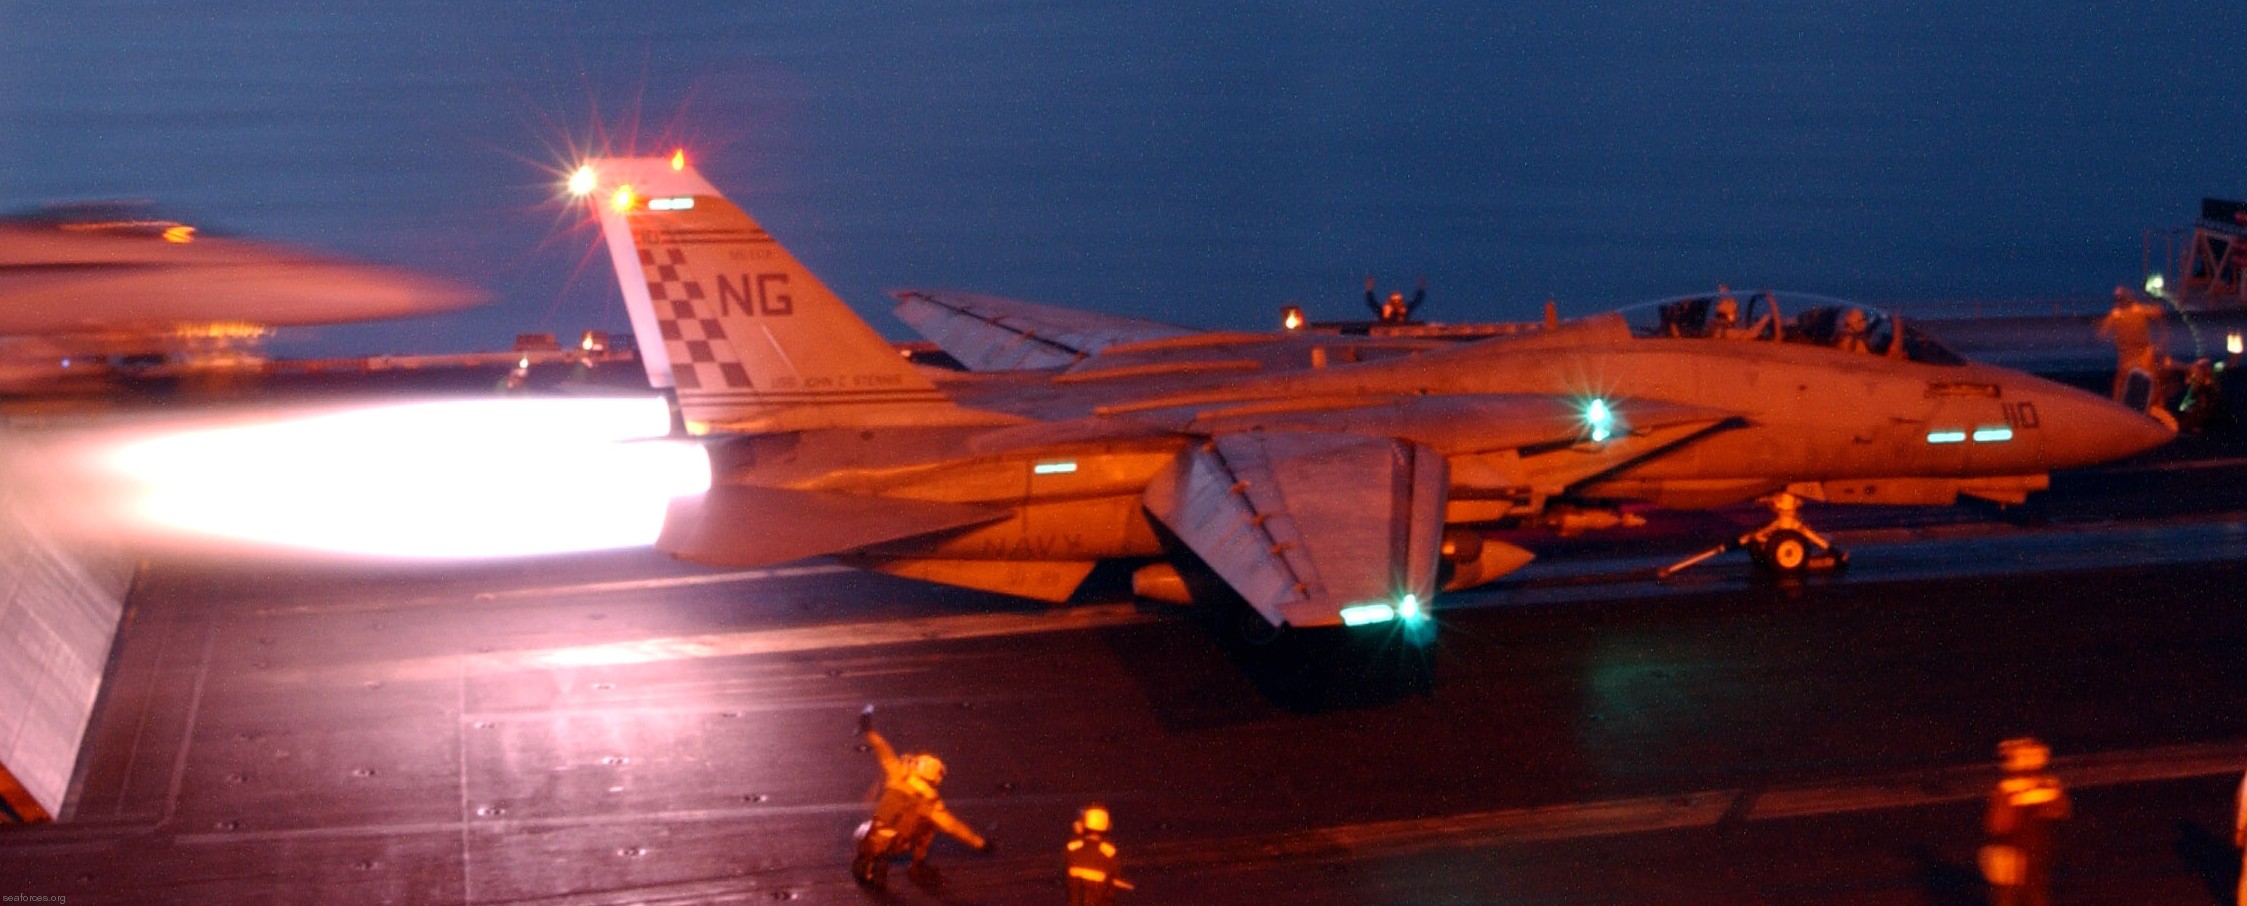 vf-211 fighting checkmates fighter squadron f-14a tomcat us navy carrier air wing cvw-9 uss john c. stennis cvn-74 02